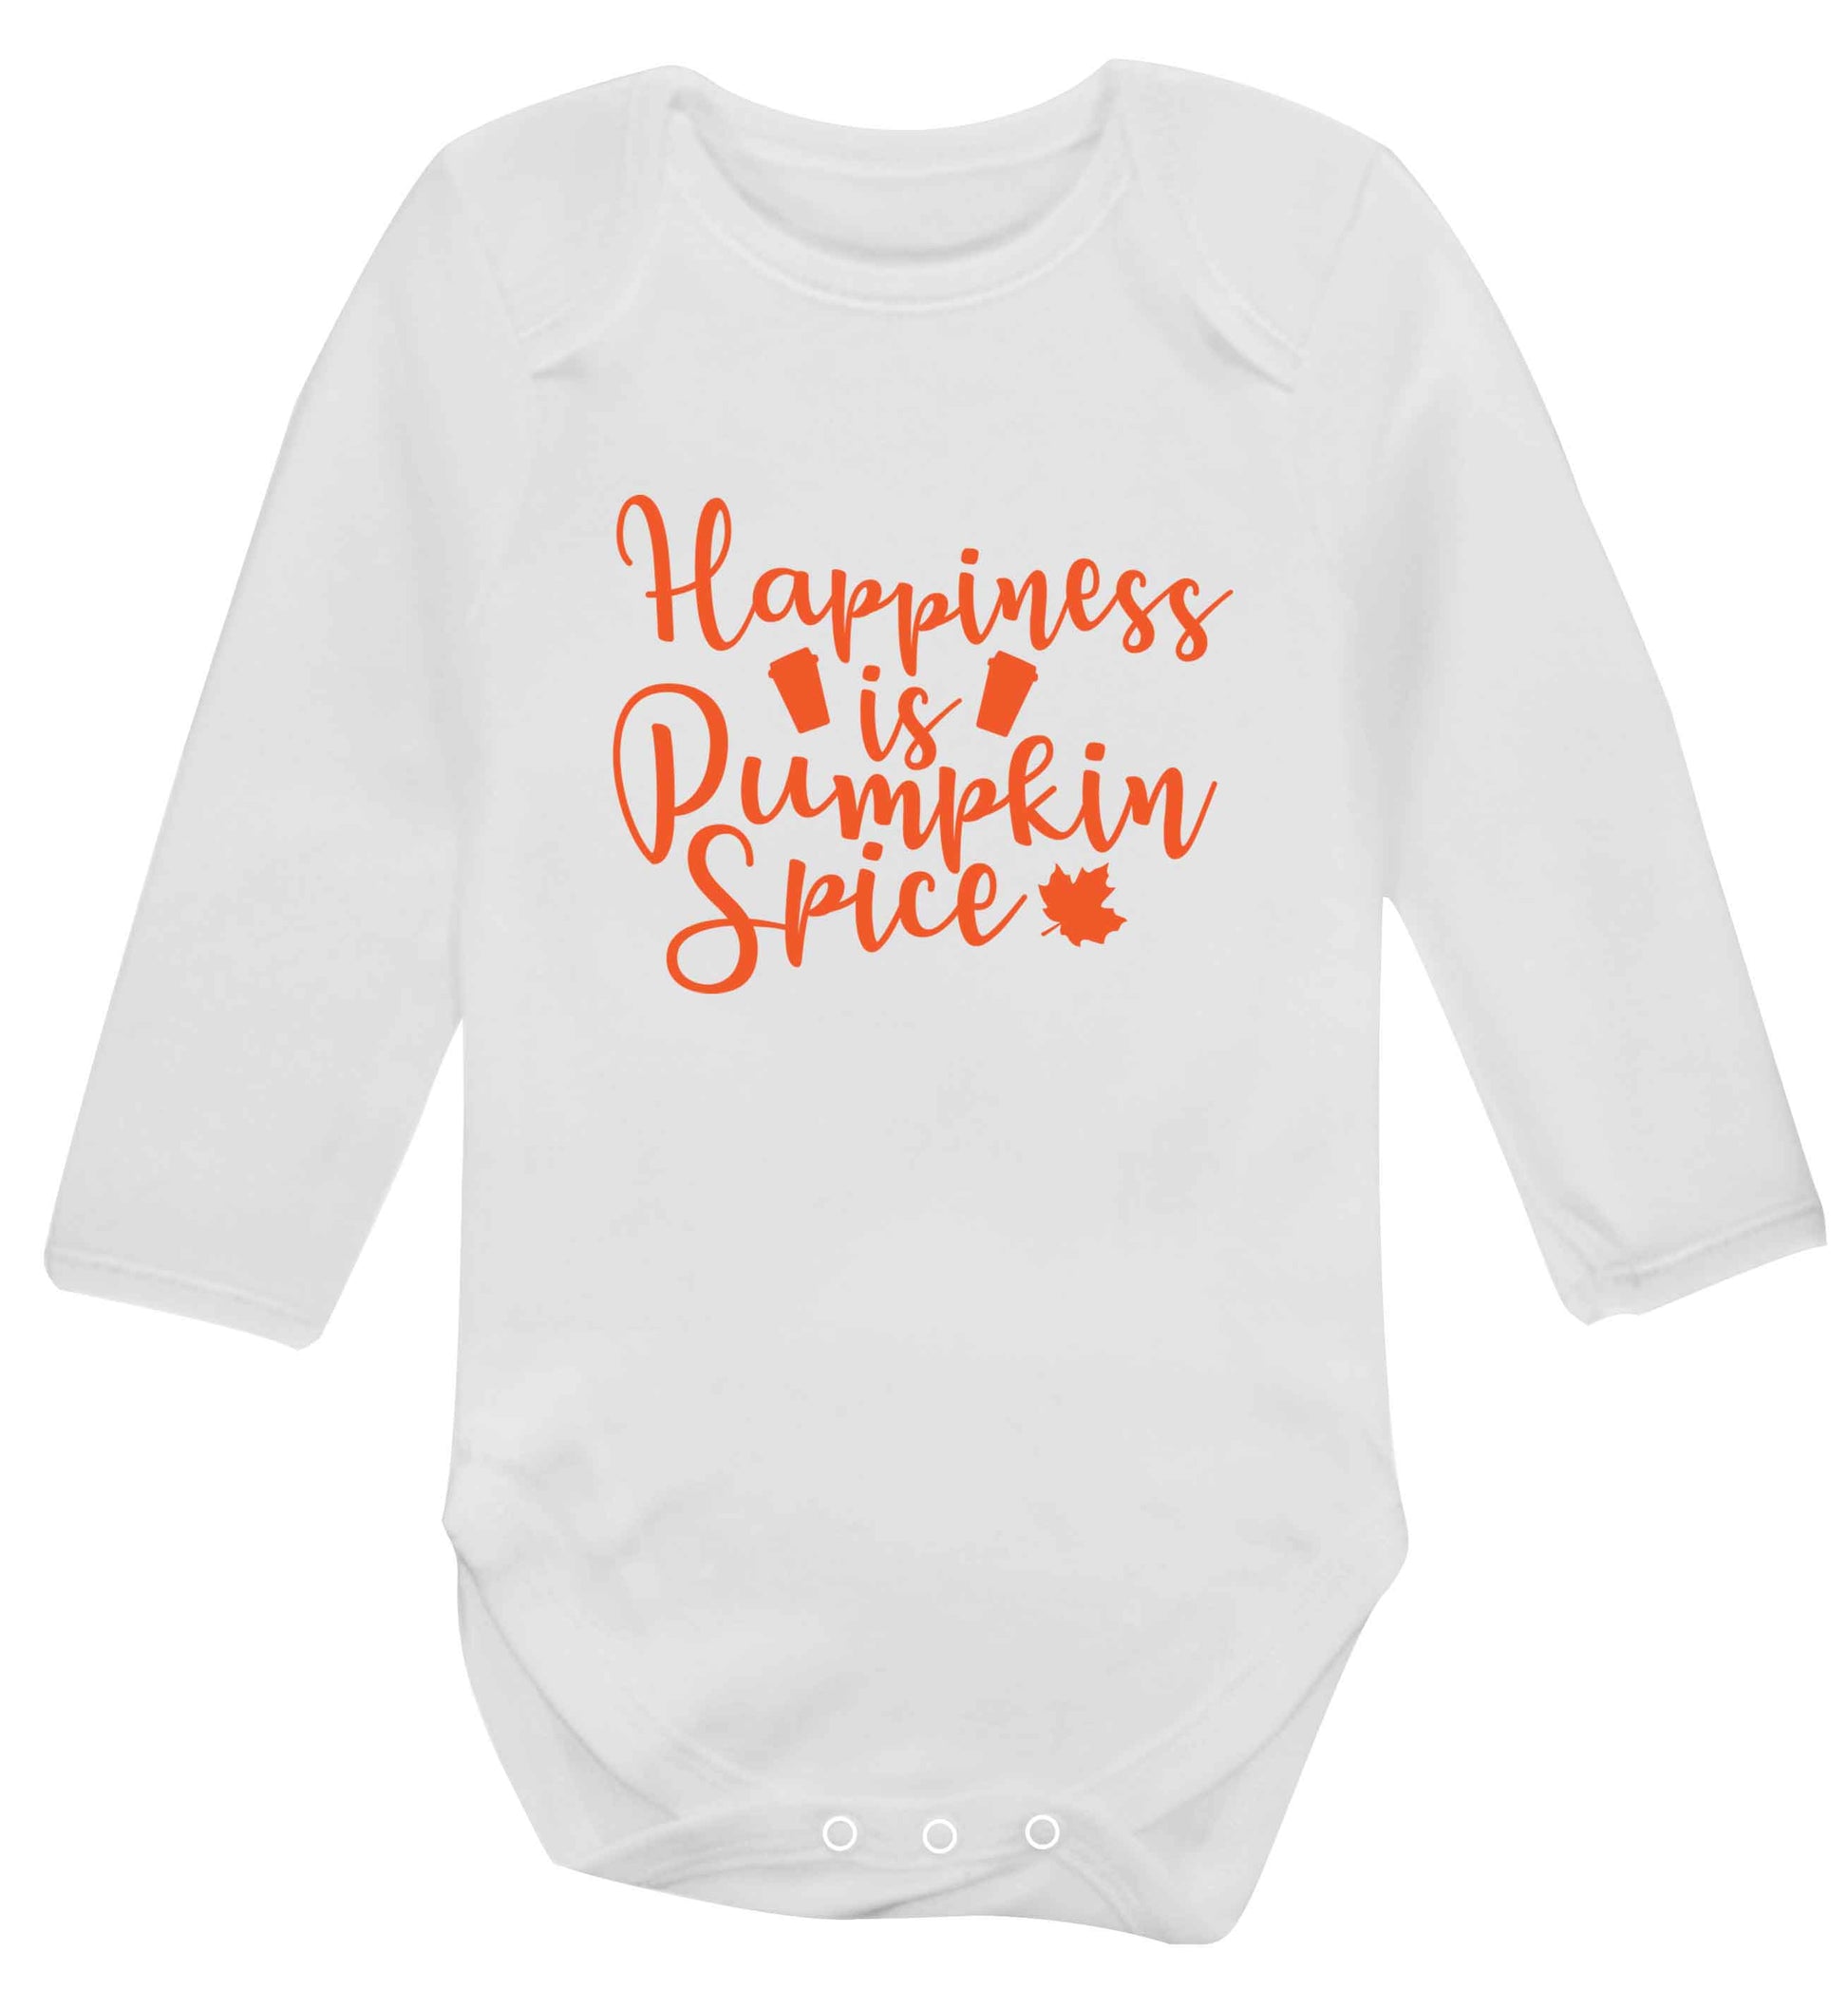 Happiness Pumpkin Spice baby vest long sleeved white 6-12 months